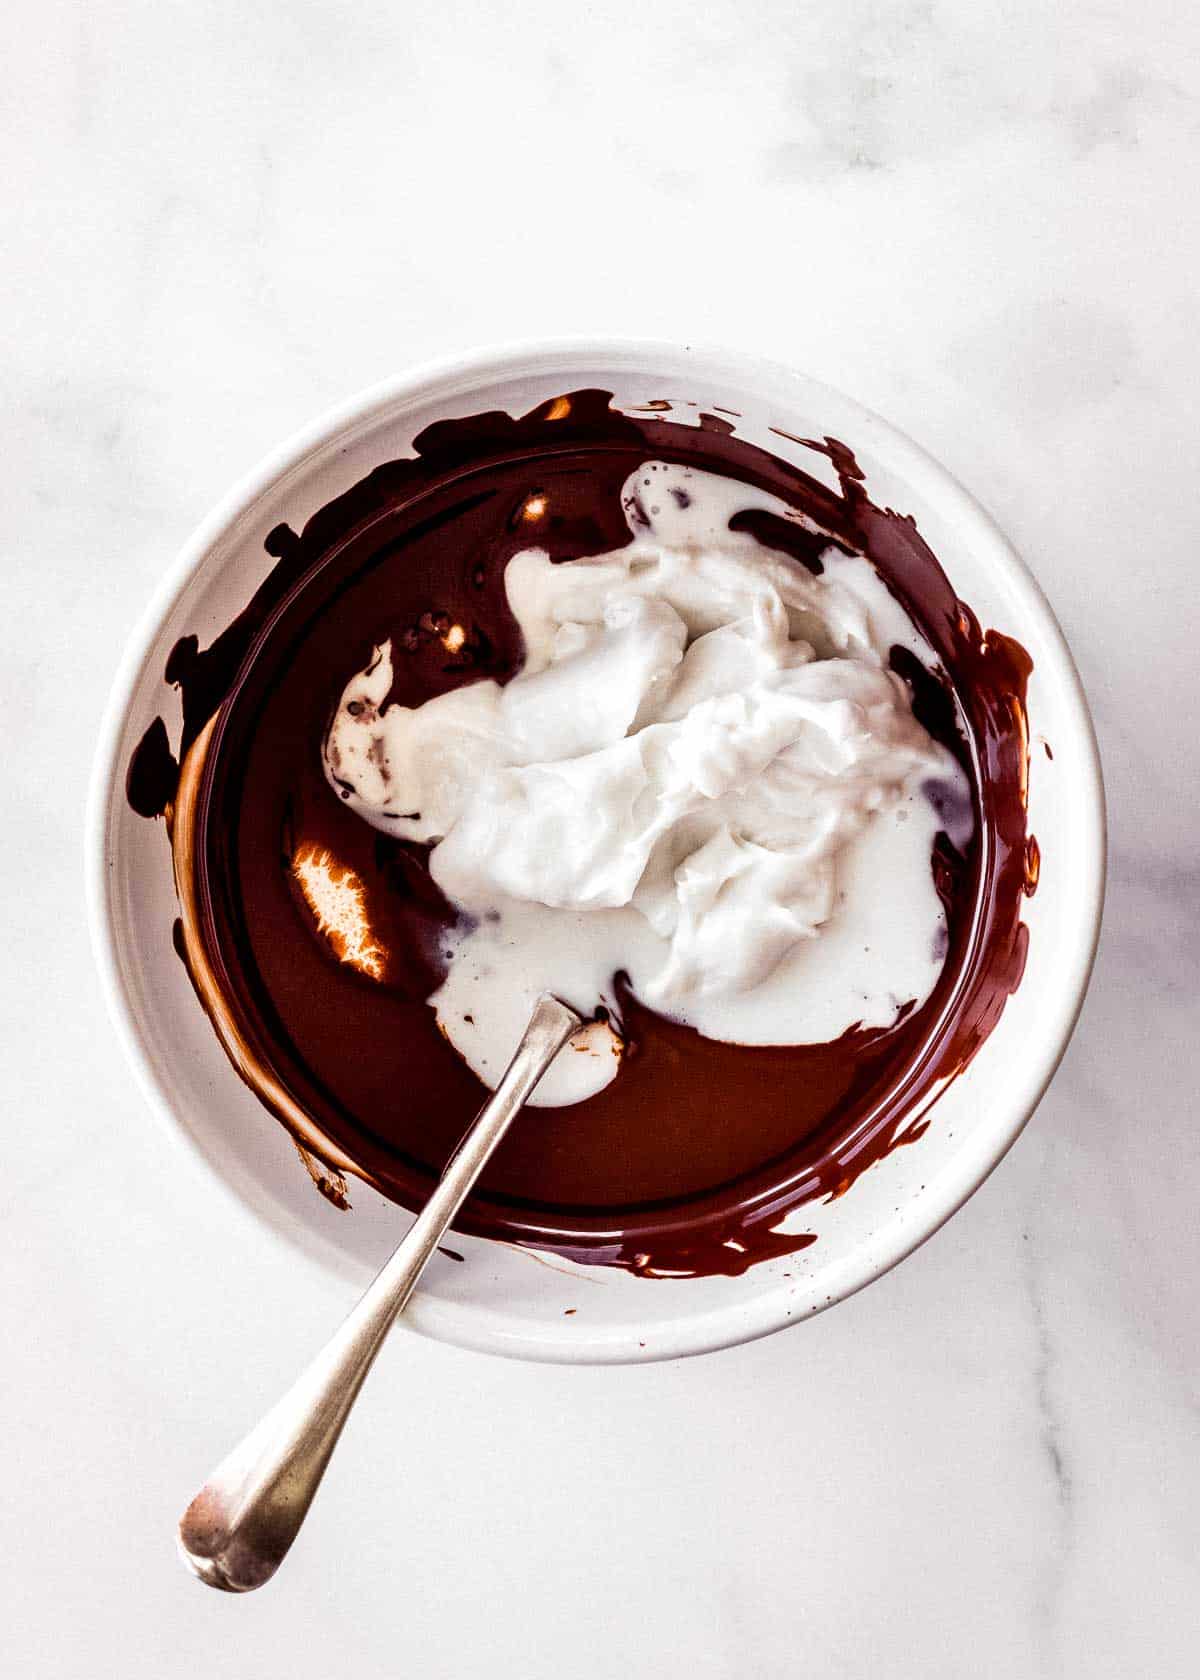 Melted dark chocolate and coconut cream are mixed together in a small bowl.